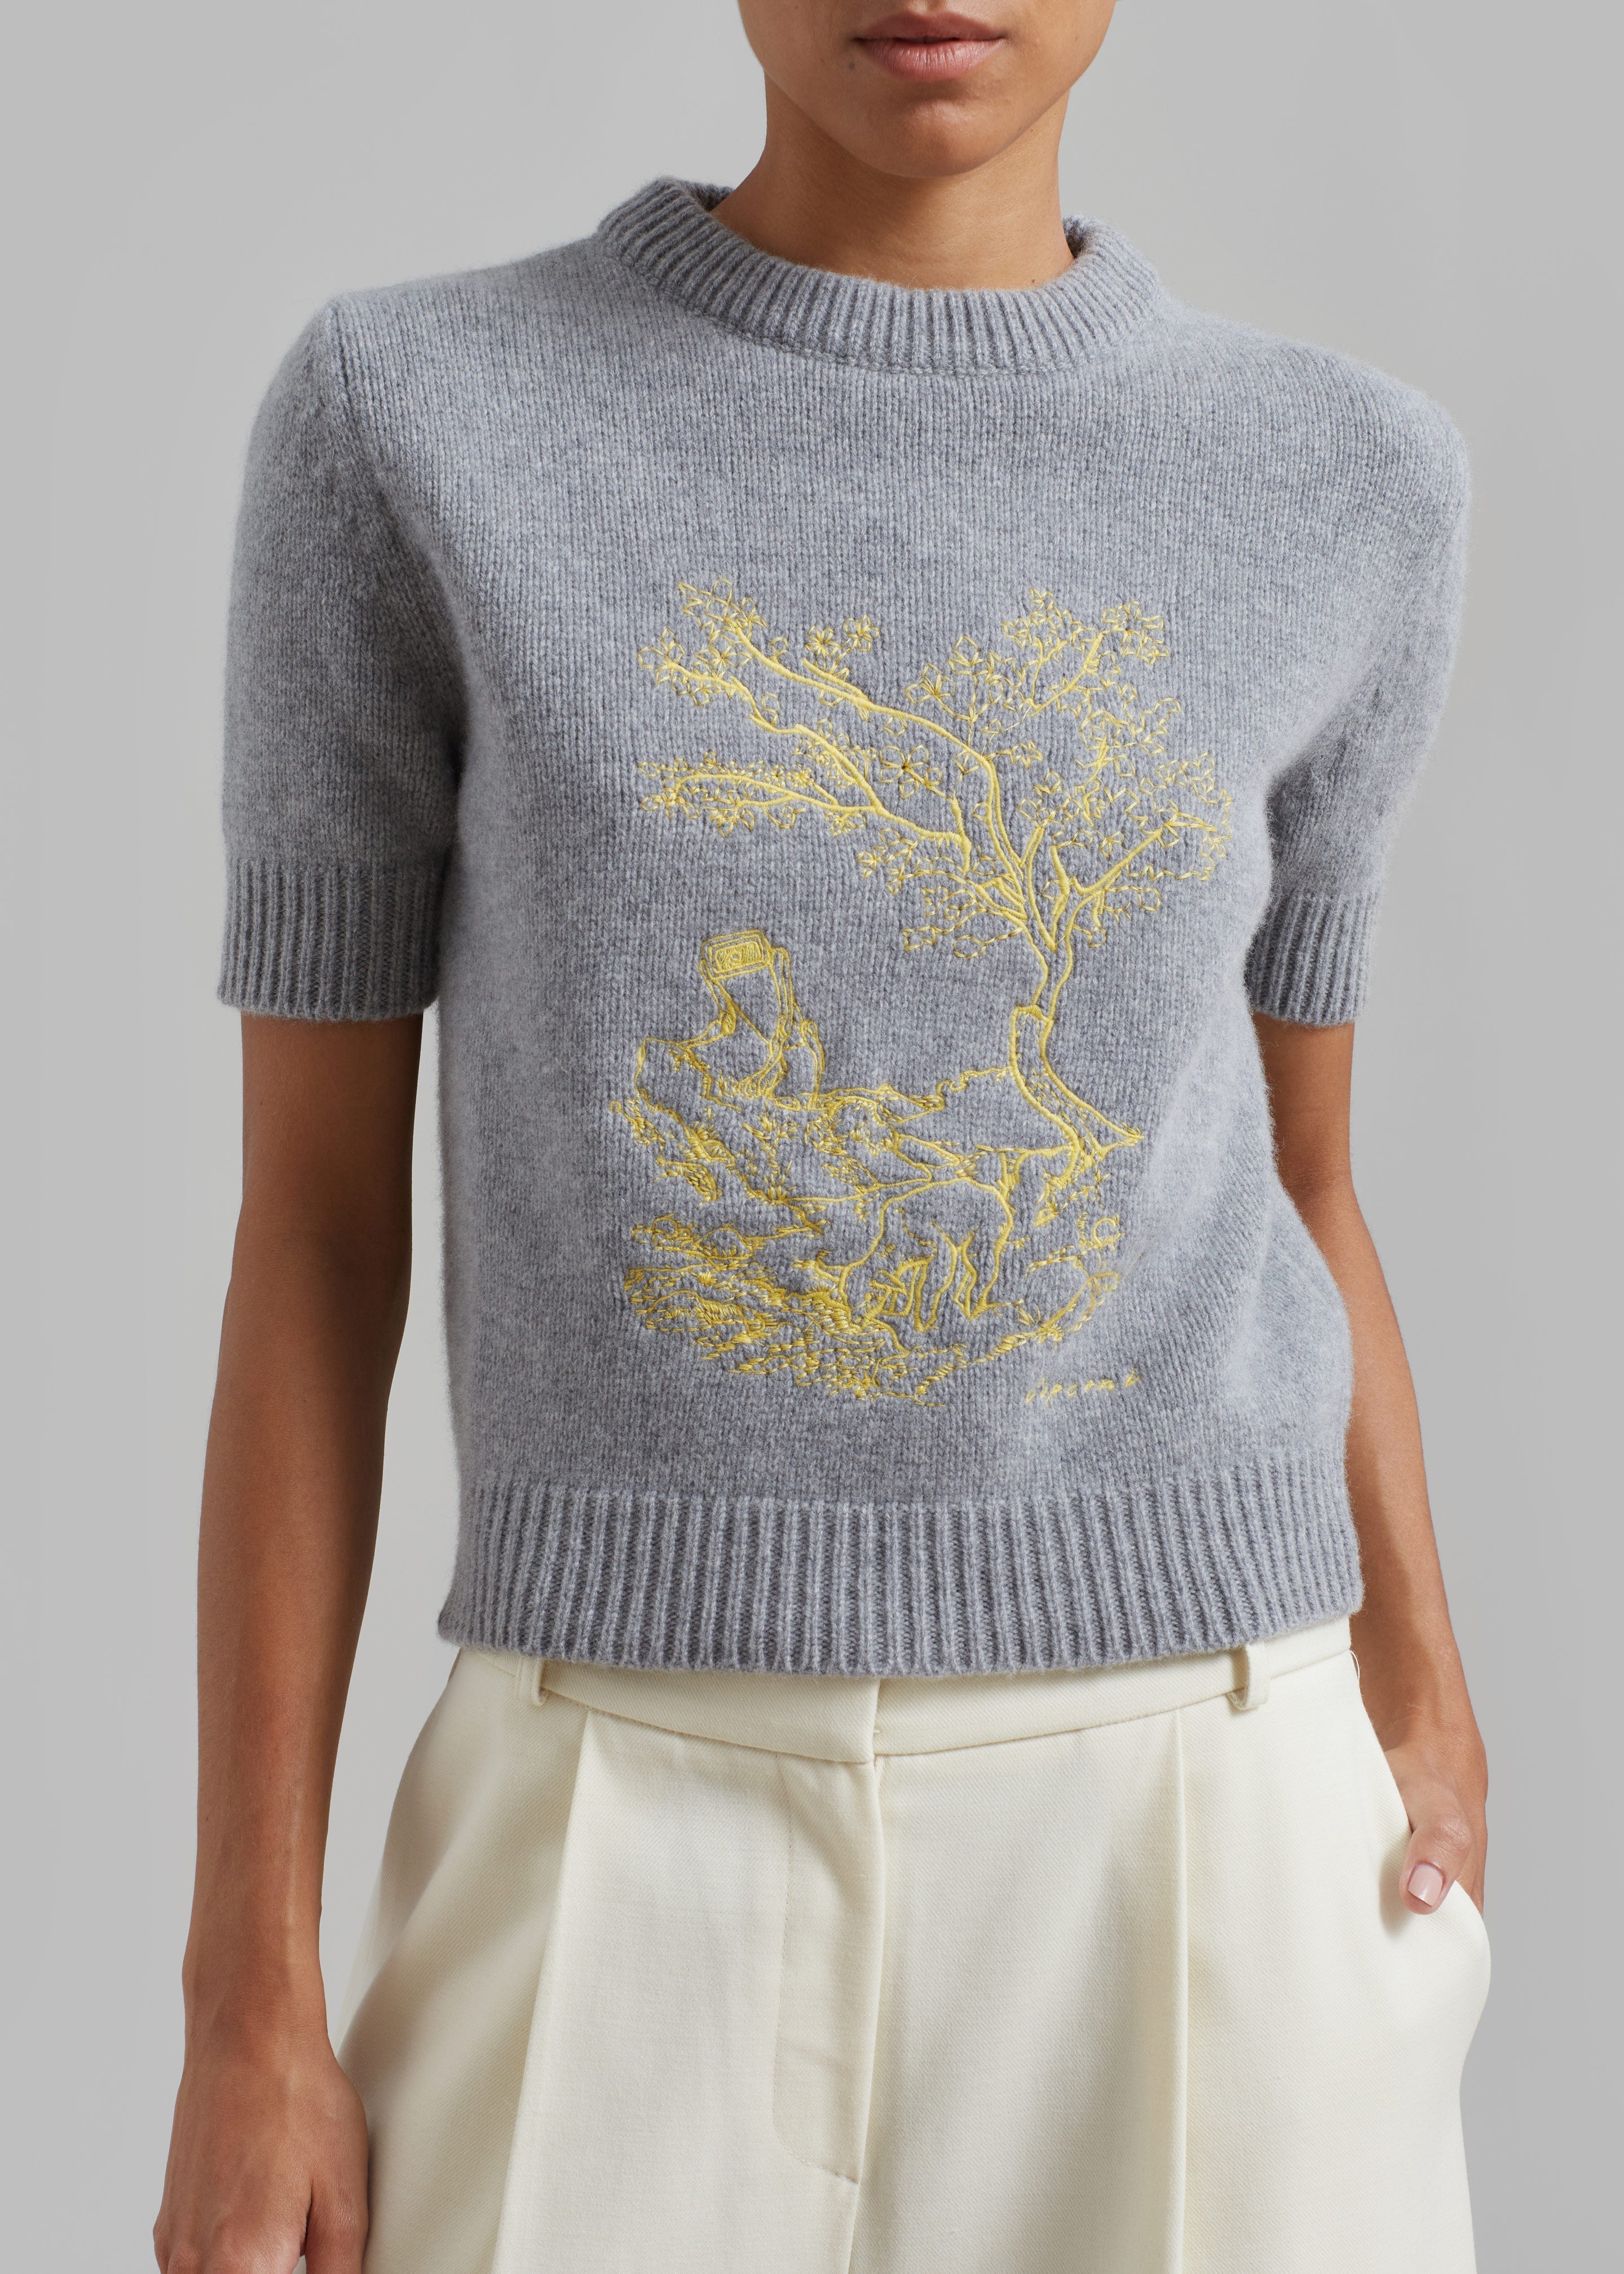 Coperni Cashmere Embroidered Cropped Sweater - Grey - 5